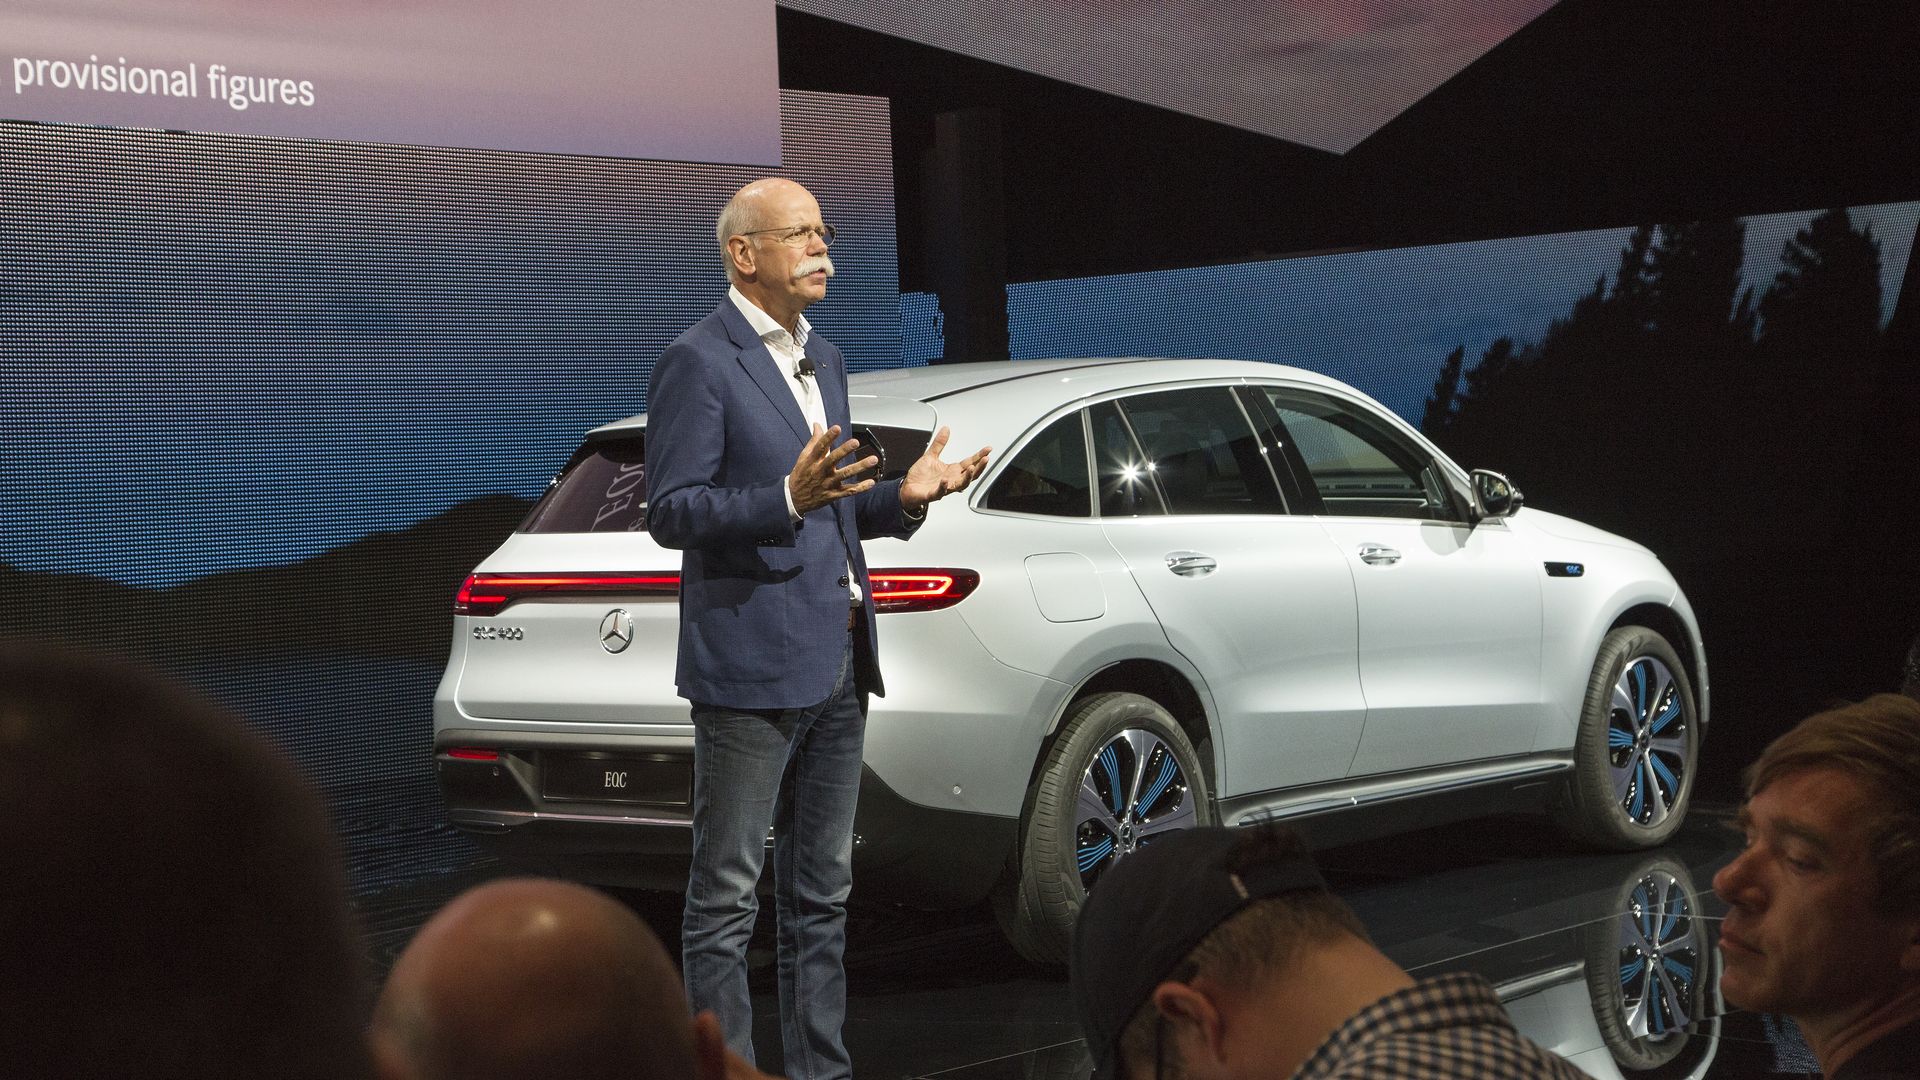 Daimler CEO speaking in front of a Mercedes